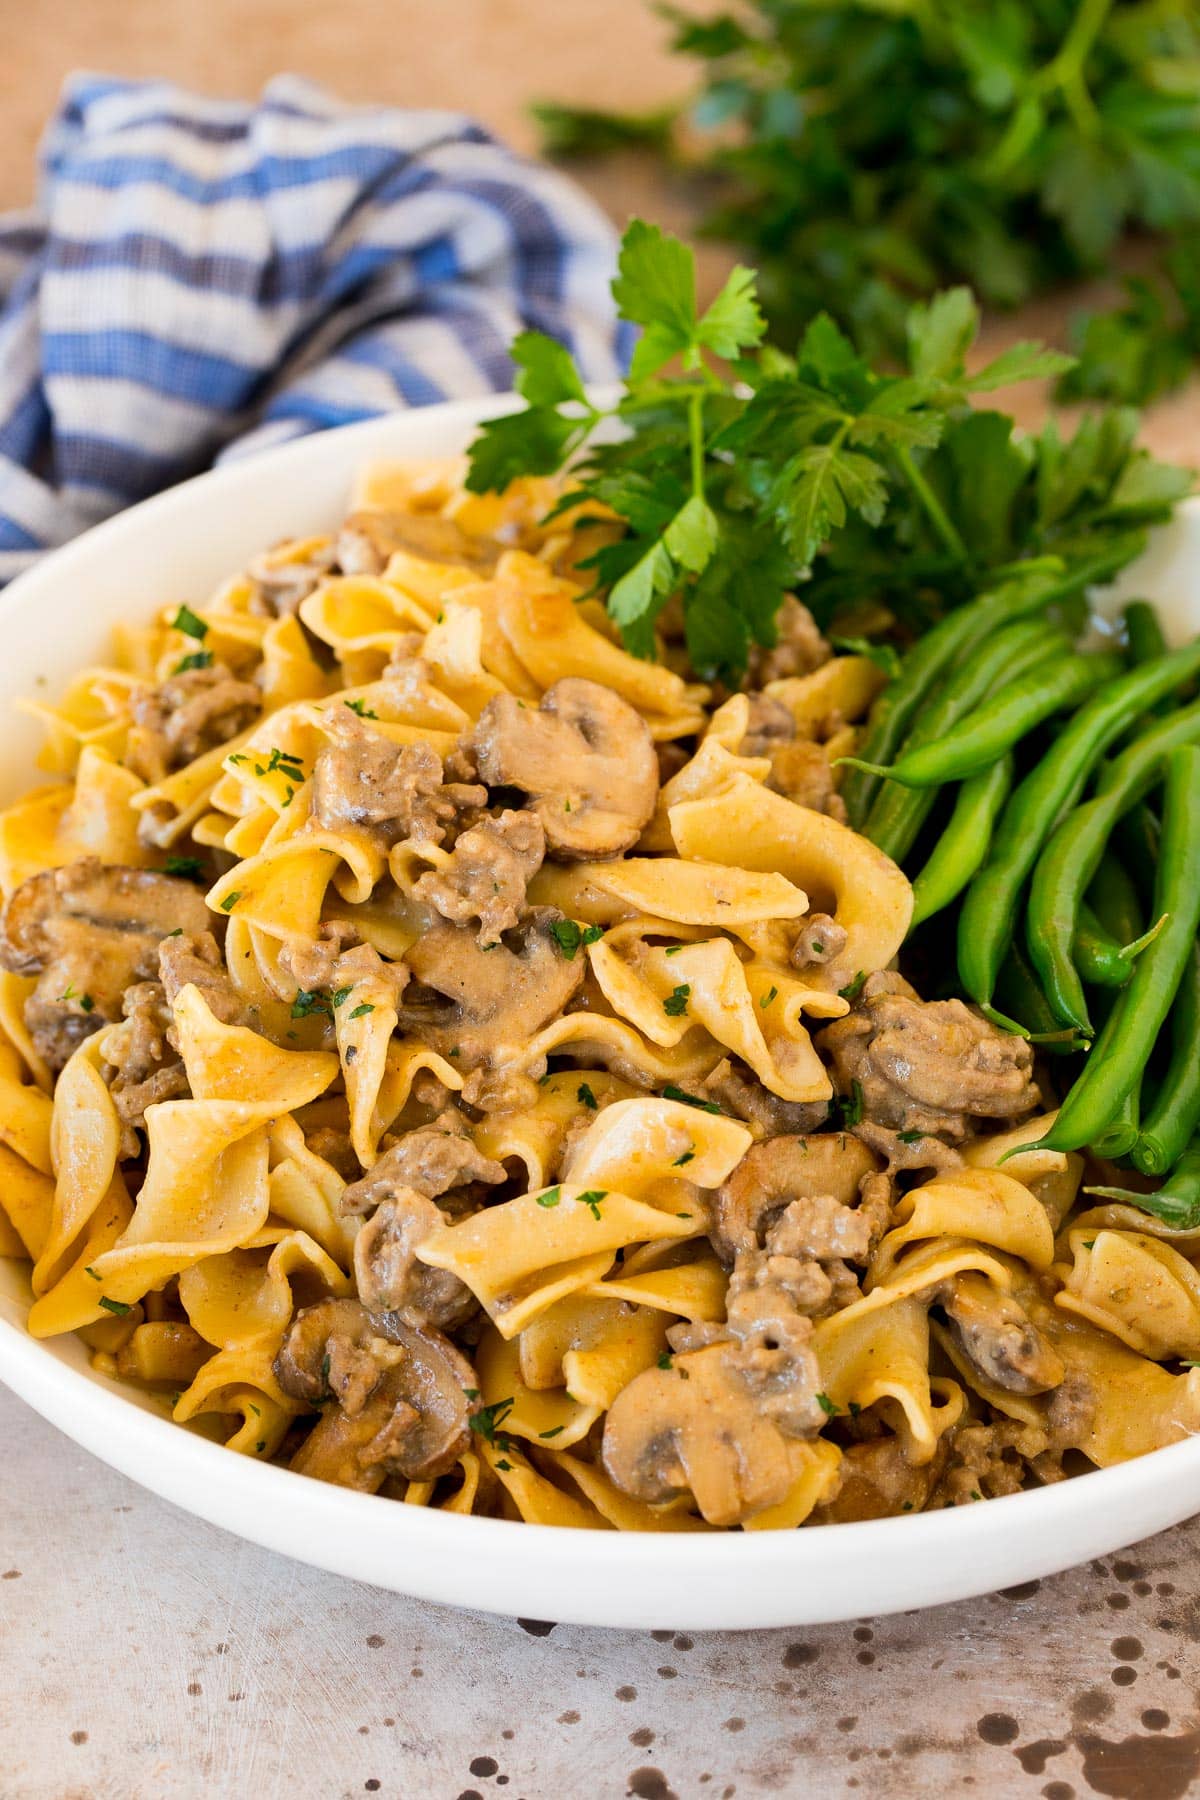 A serving bowl filled with ground beef stroganoff and a side of green beans.